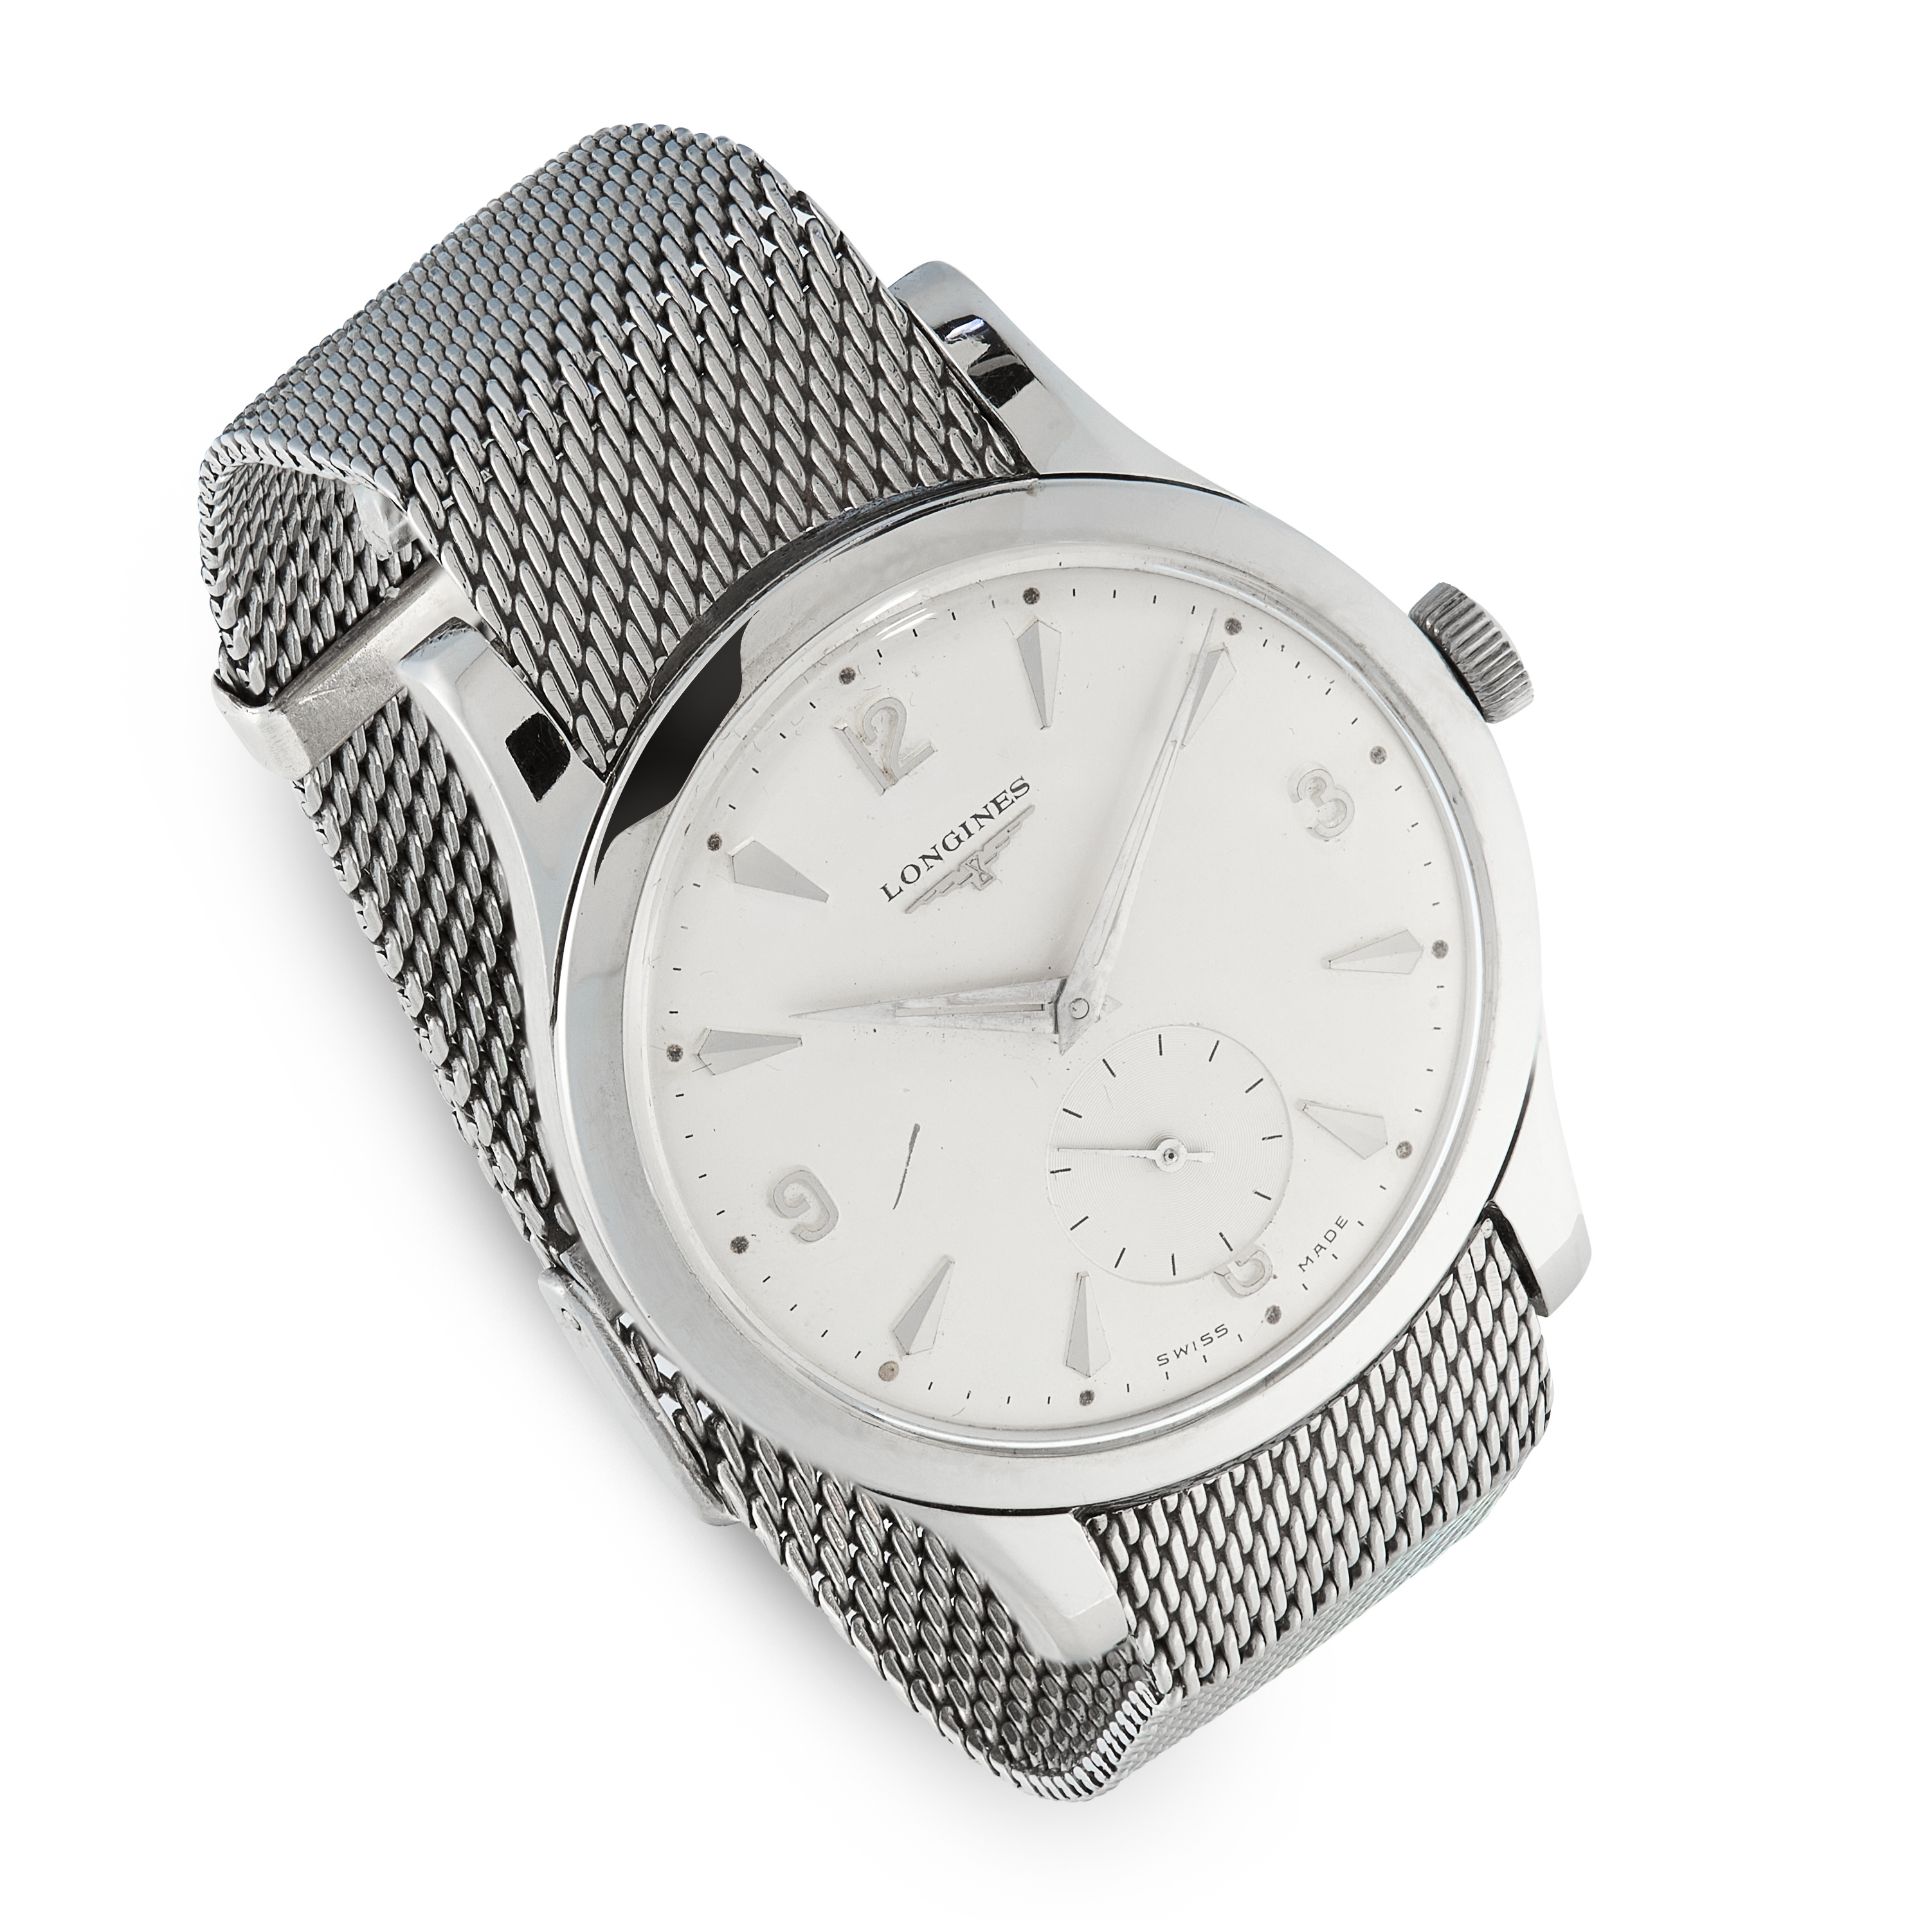 A GENTLEMAN'S OVERSIZED STAINLESS STEEL WRIST WATCH, LONGINES. Circa 1950’s, 36mm Steel Case and